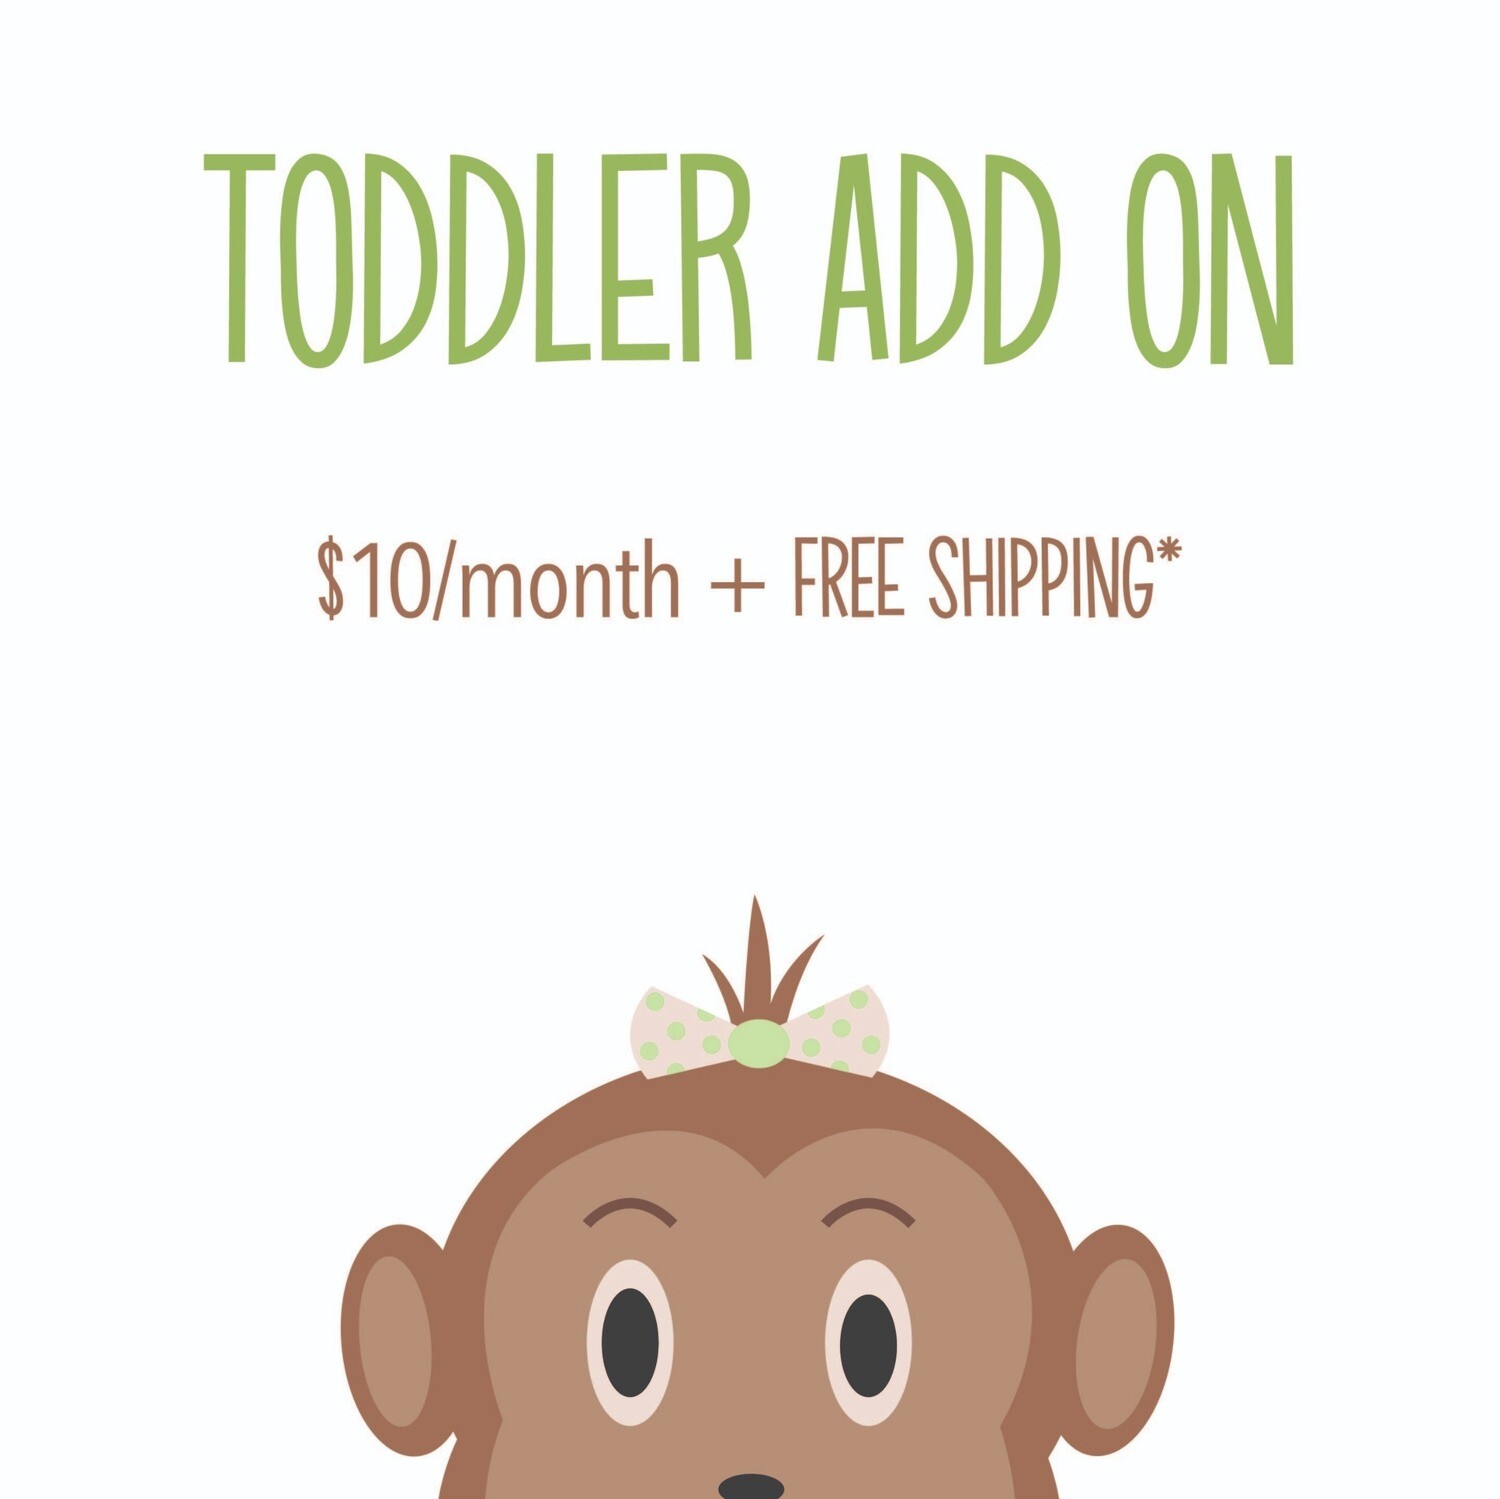 TODDLER ADD ON